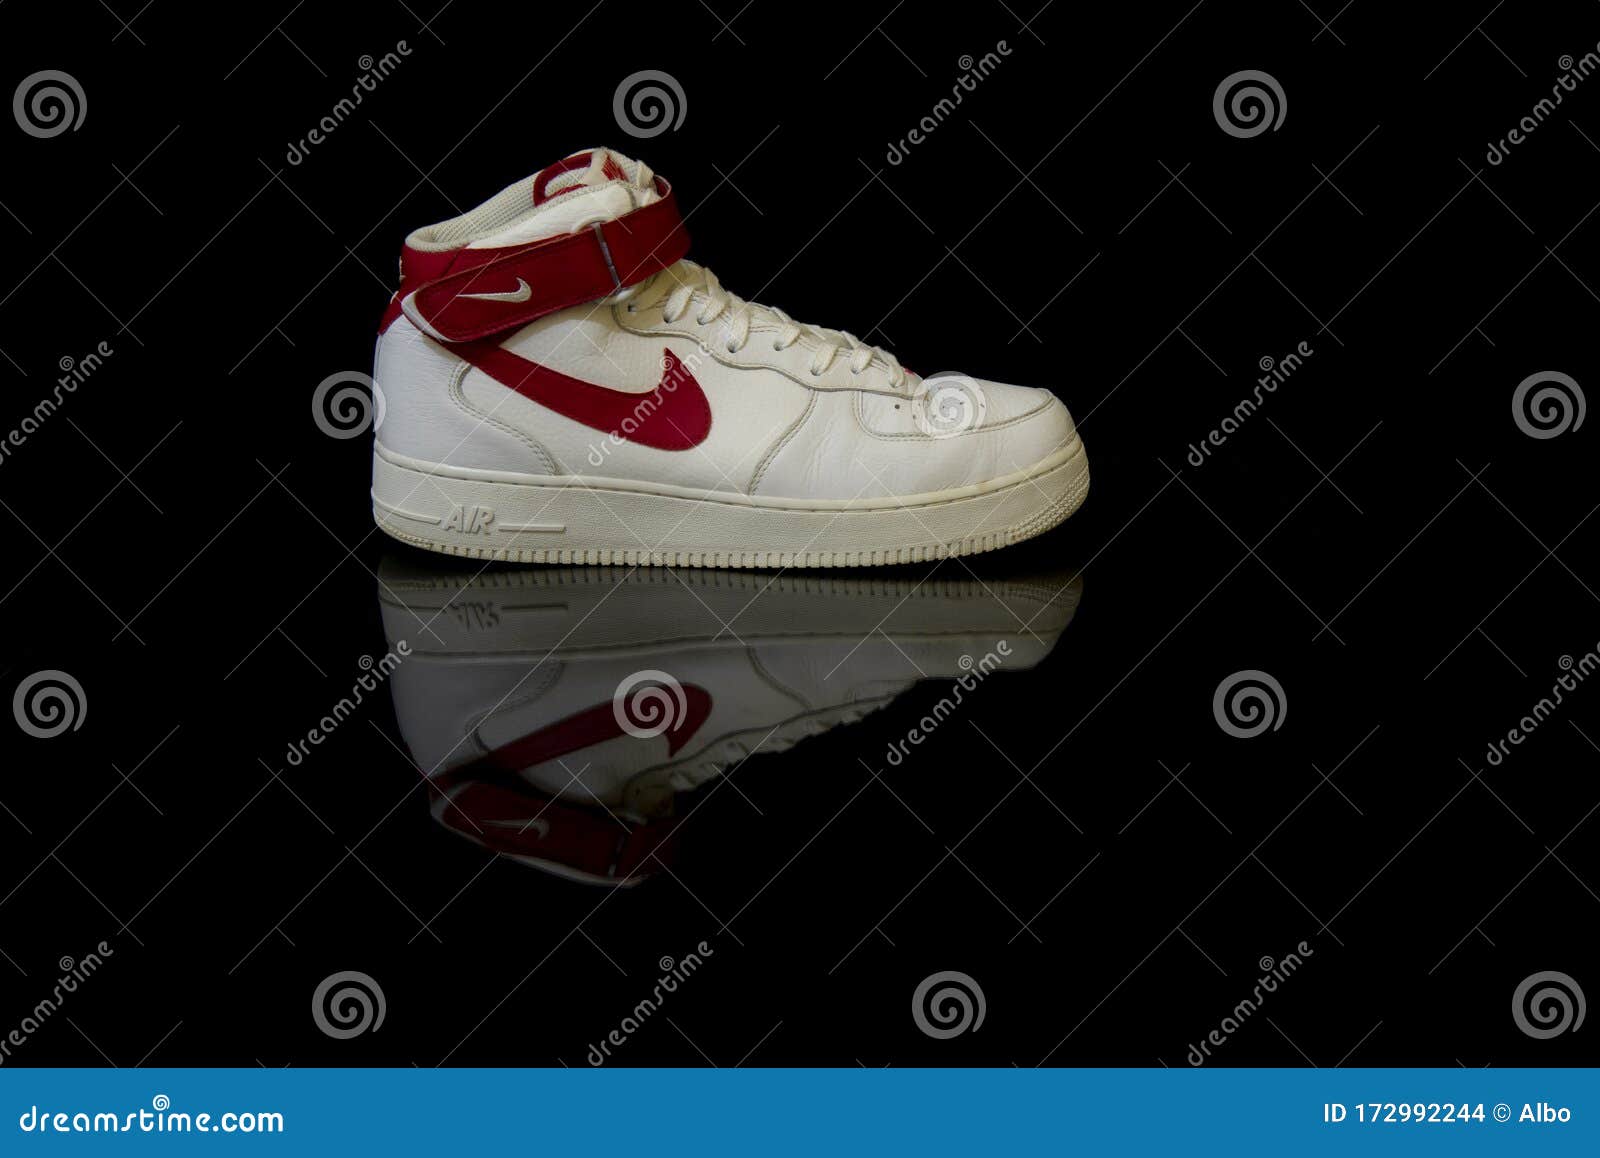 Nike Air Force 1 High '07 White University Red